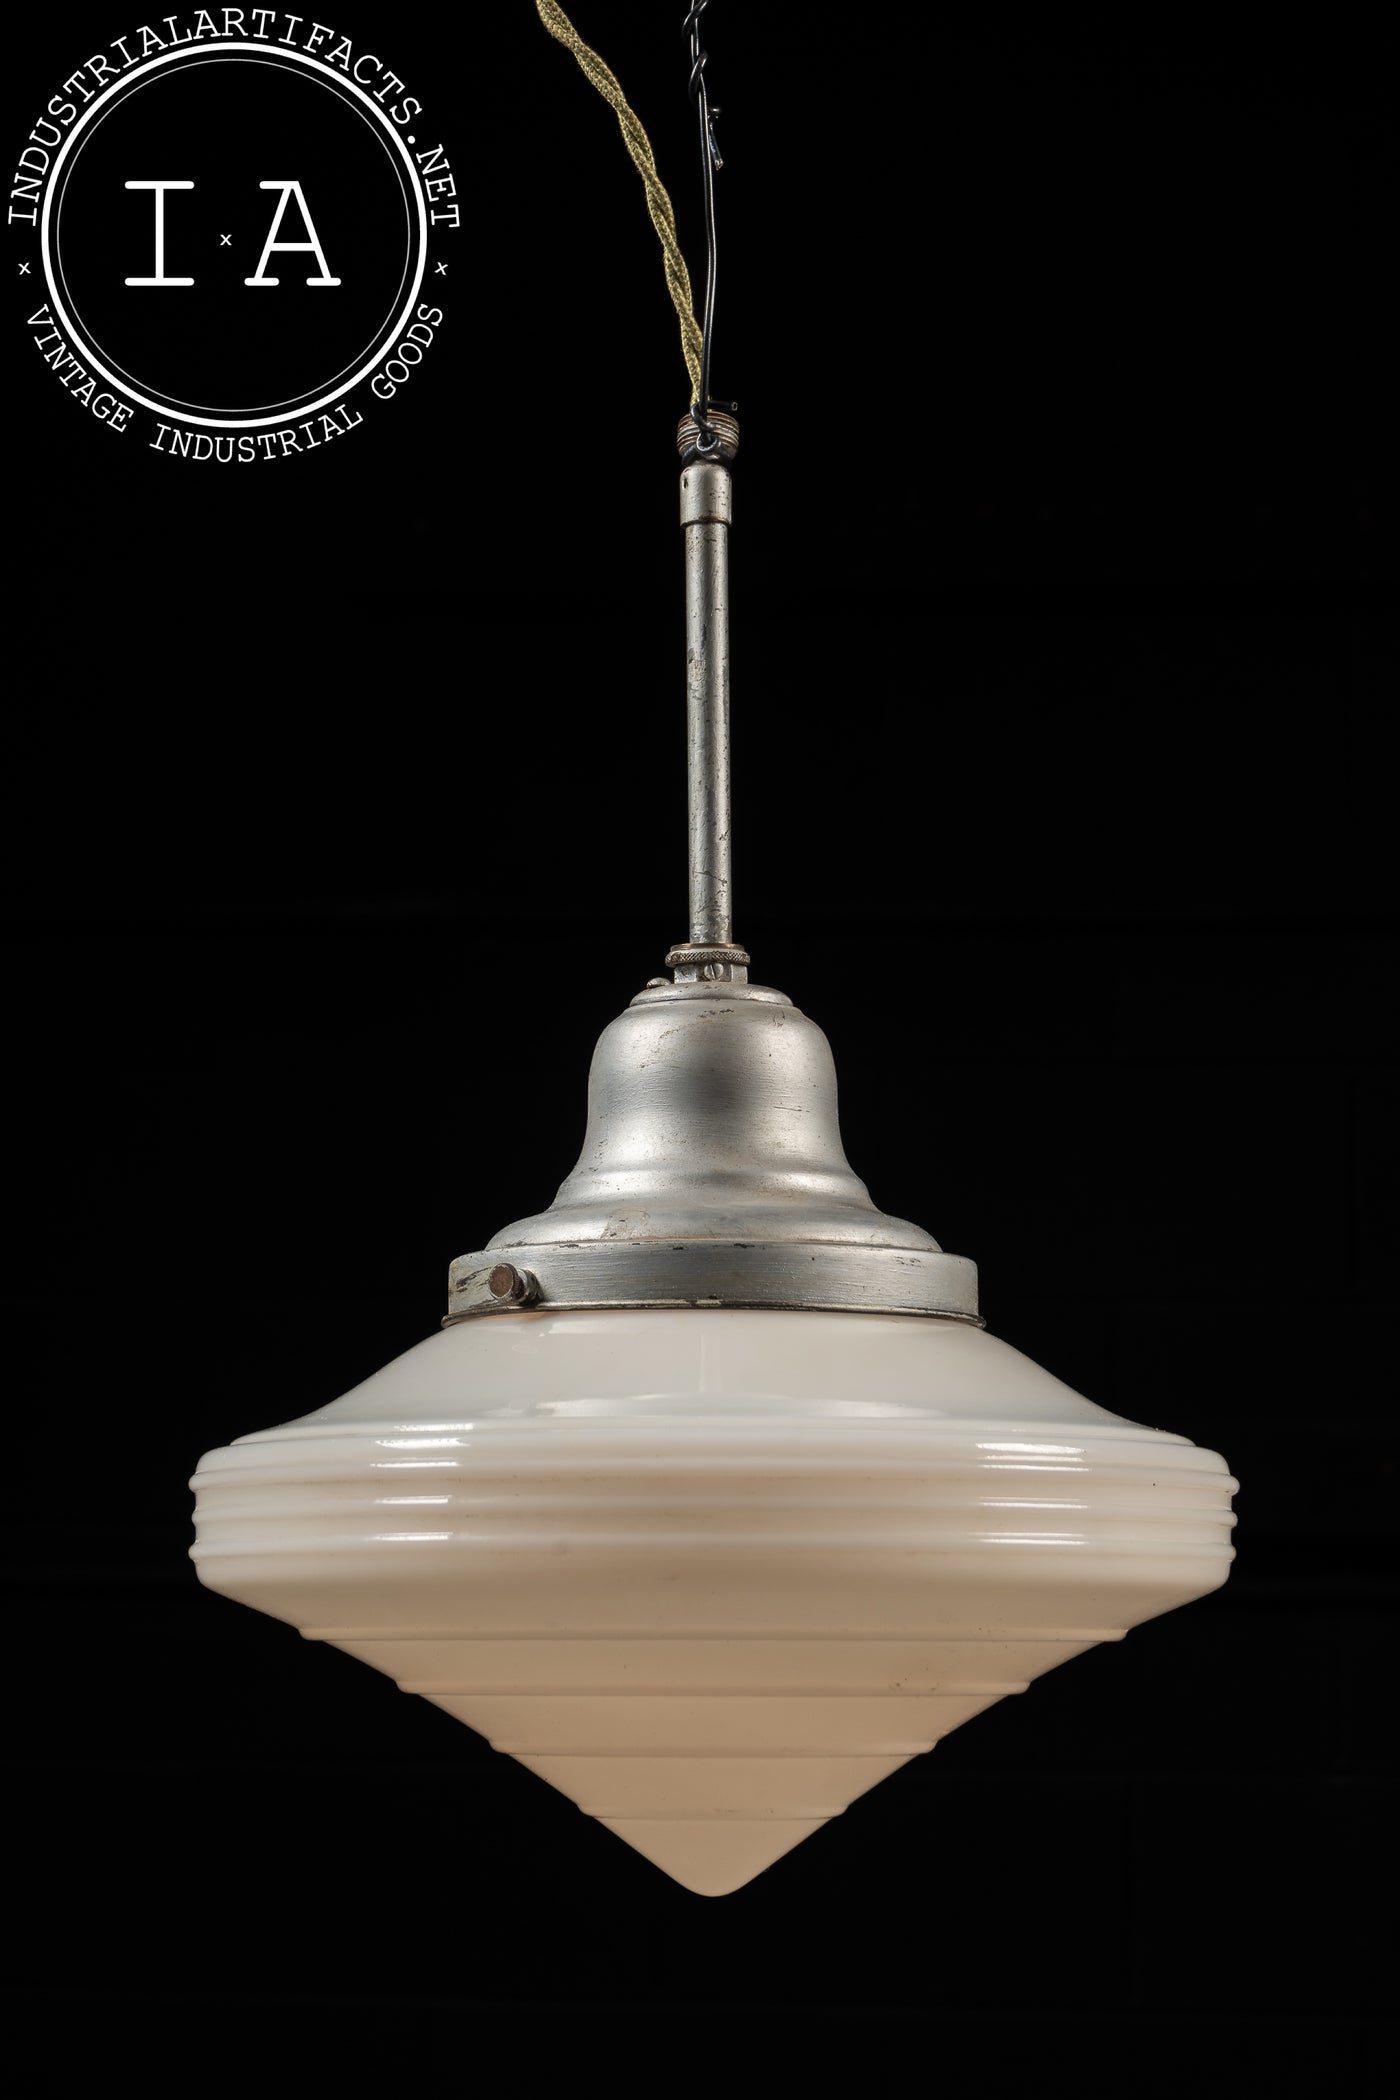 Antique Schoolhouse Ceiling Lamp with Small Shade